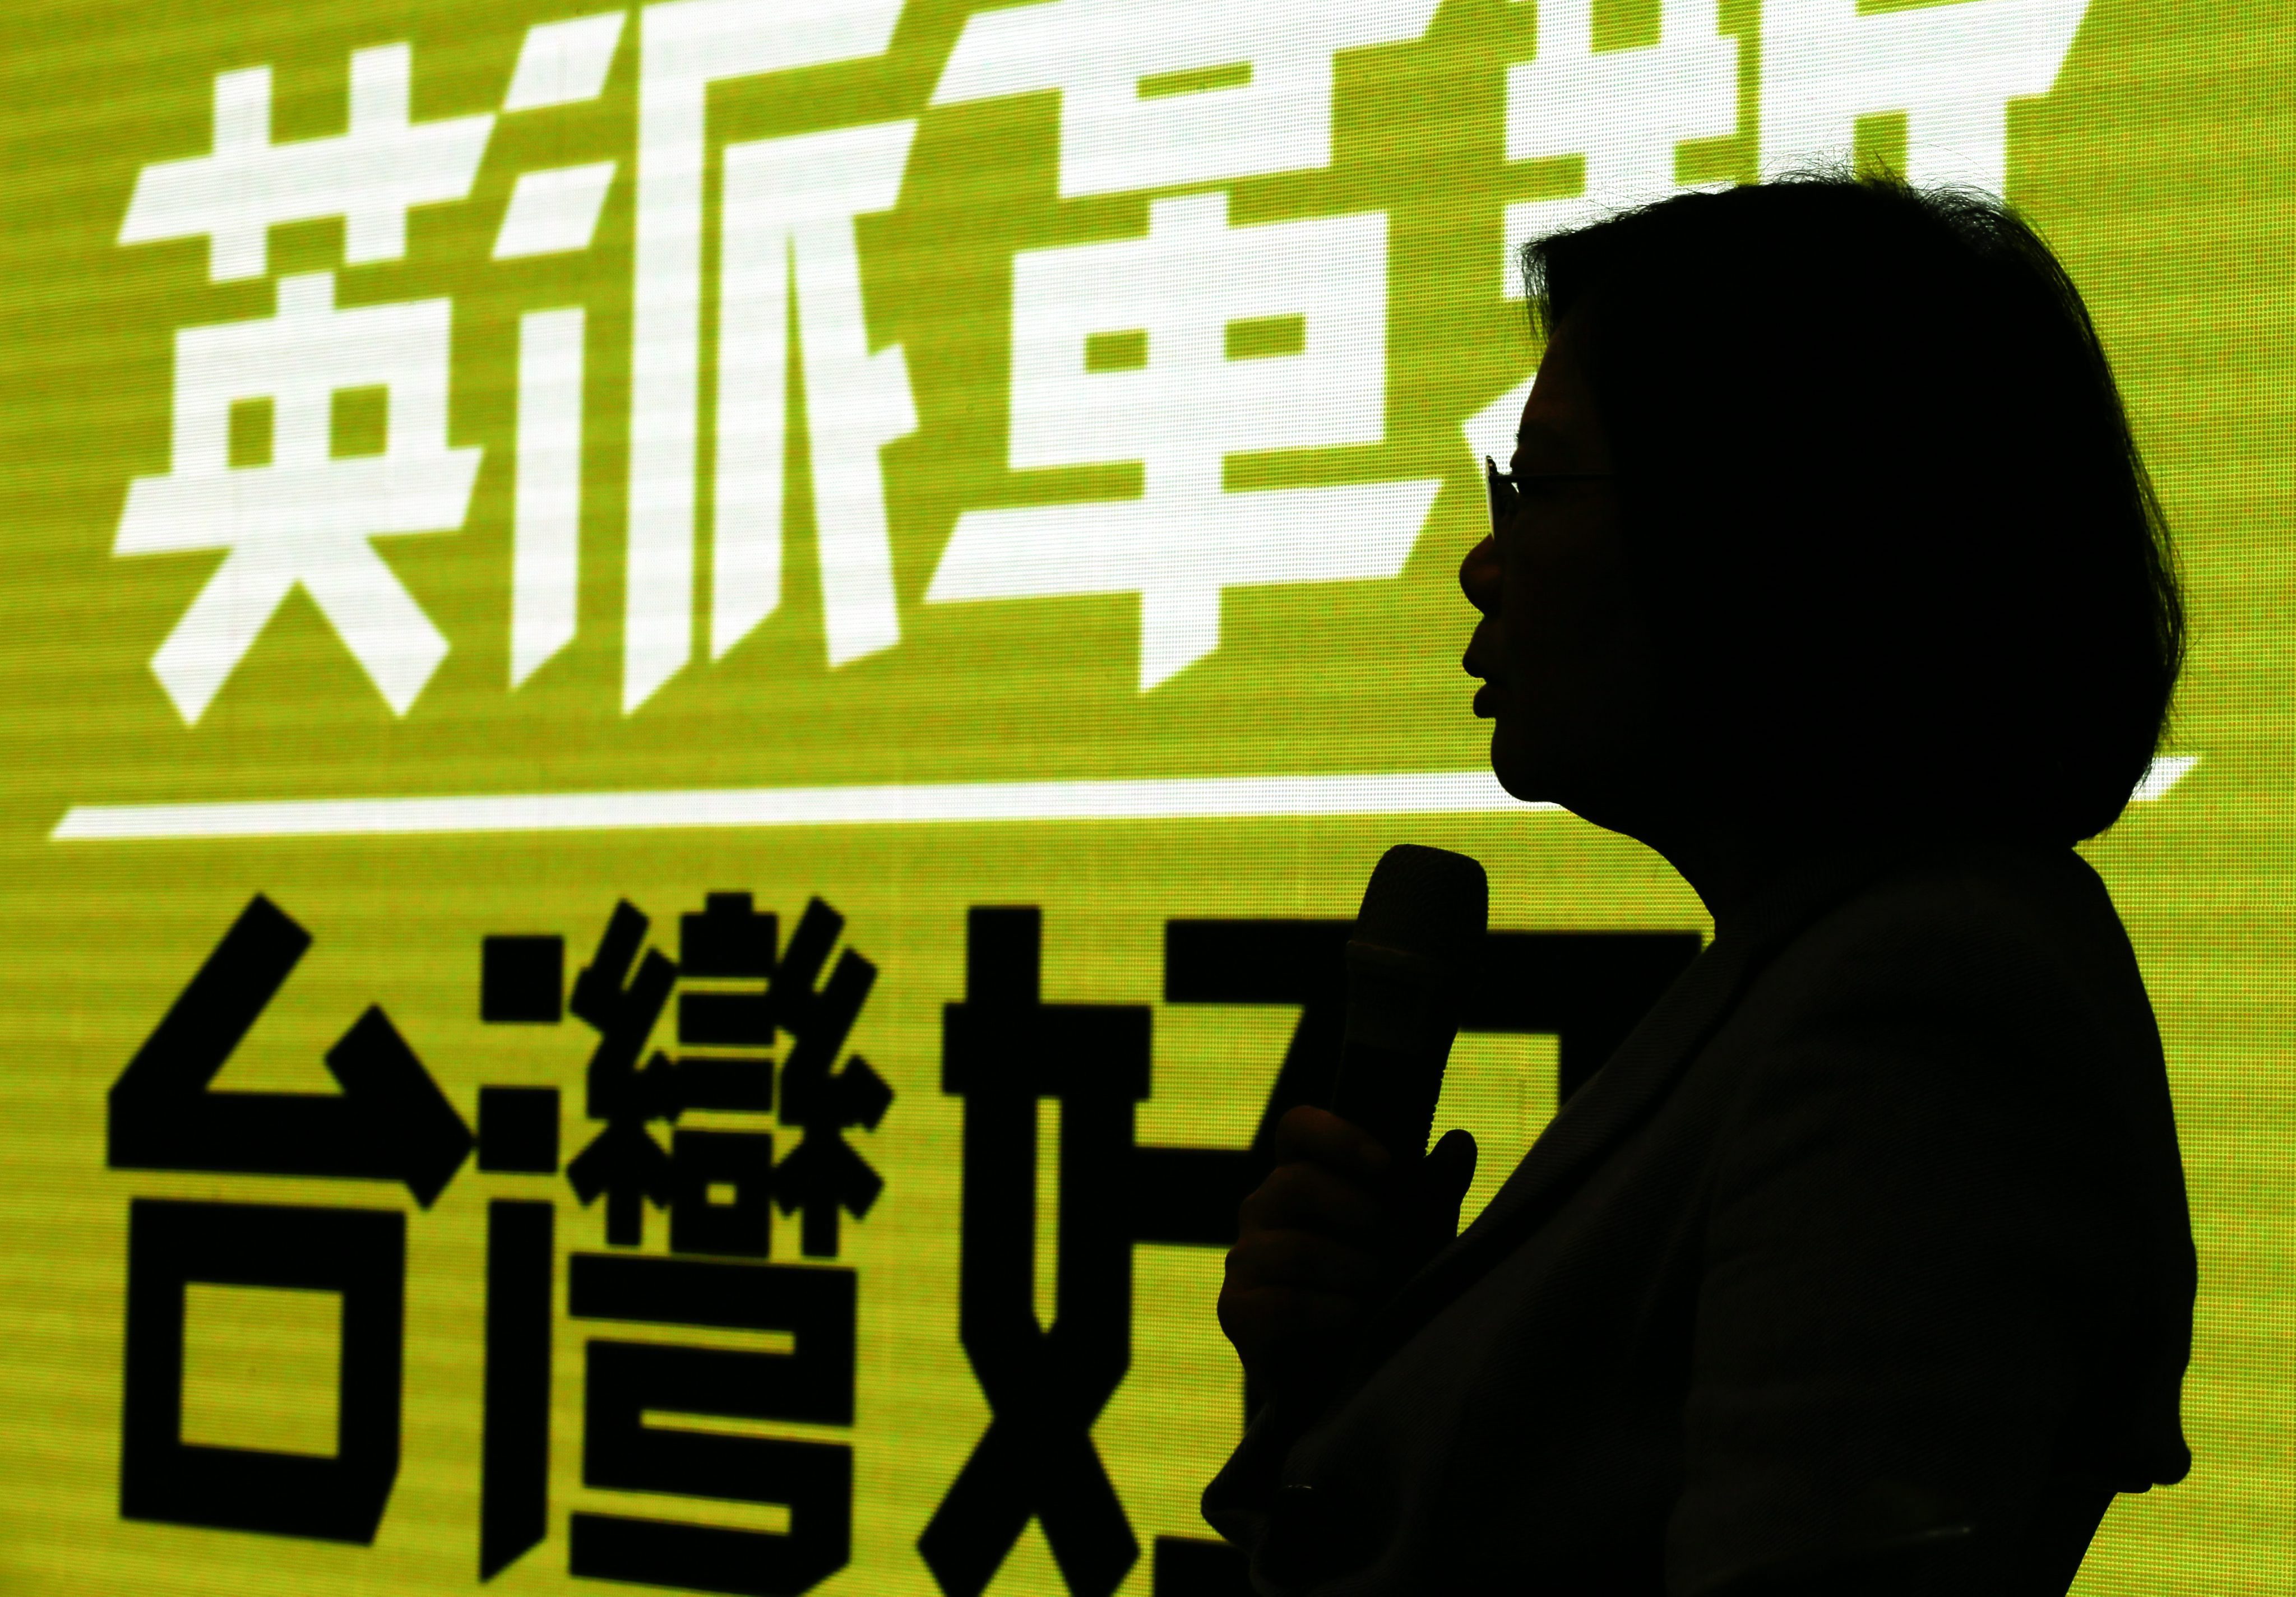 Taiwanese opposition leader and presidential candidate Tsai Ing-wen is silhouetted against a banner as she speaks during a news conference inside the Democratic Progressive Party headquarters in Taipei last month. Photo: EPA